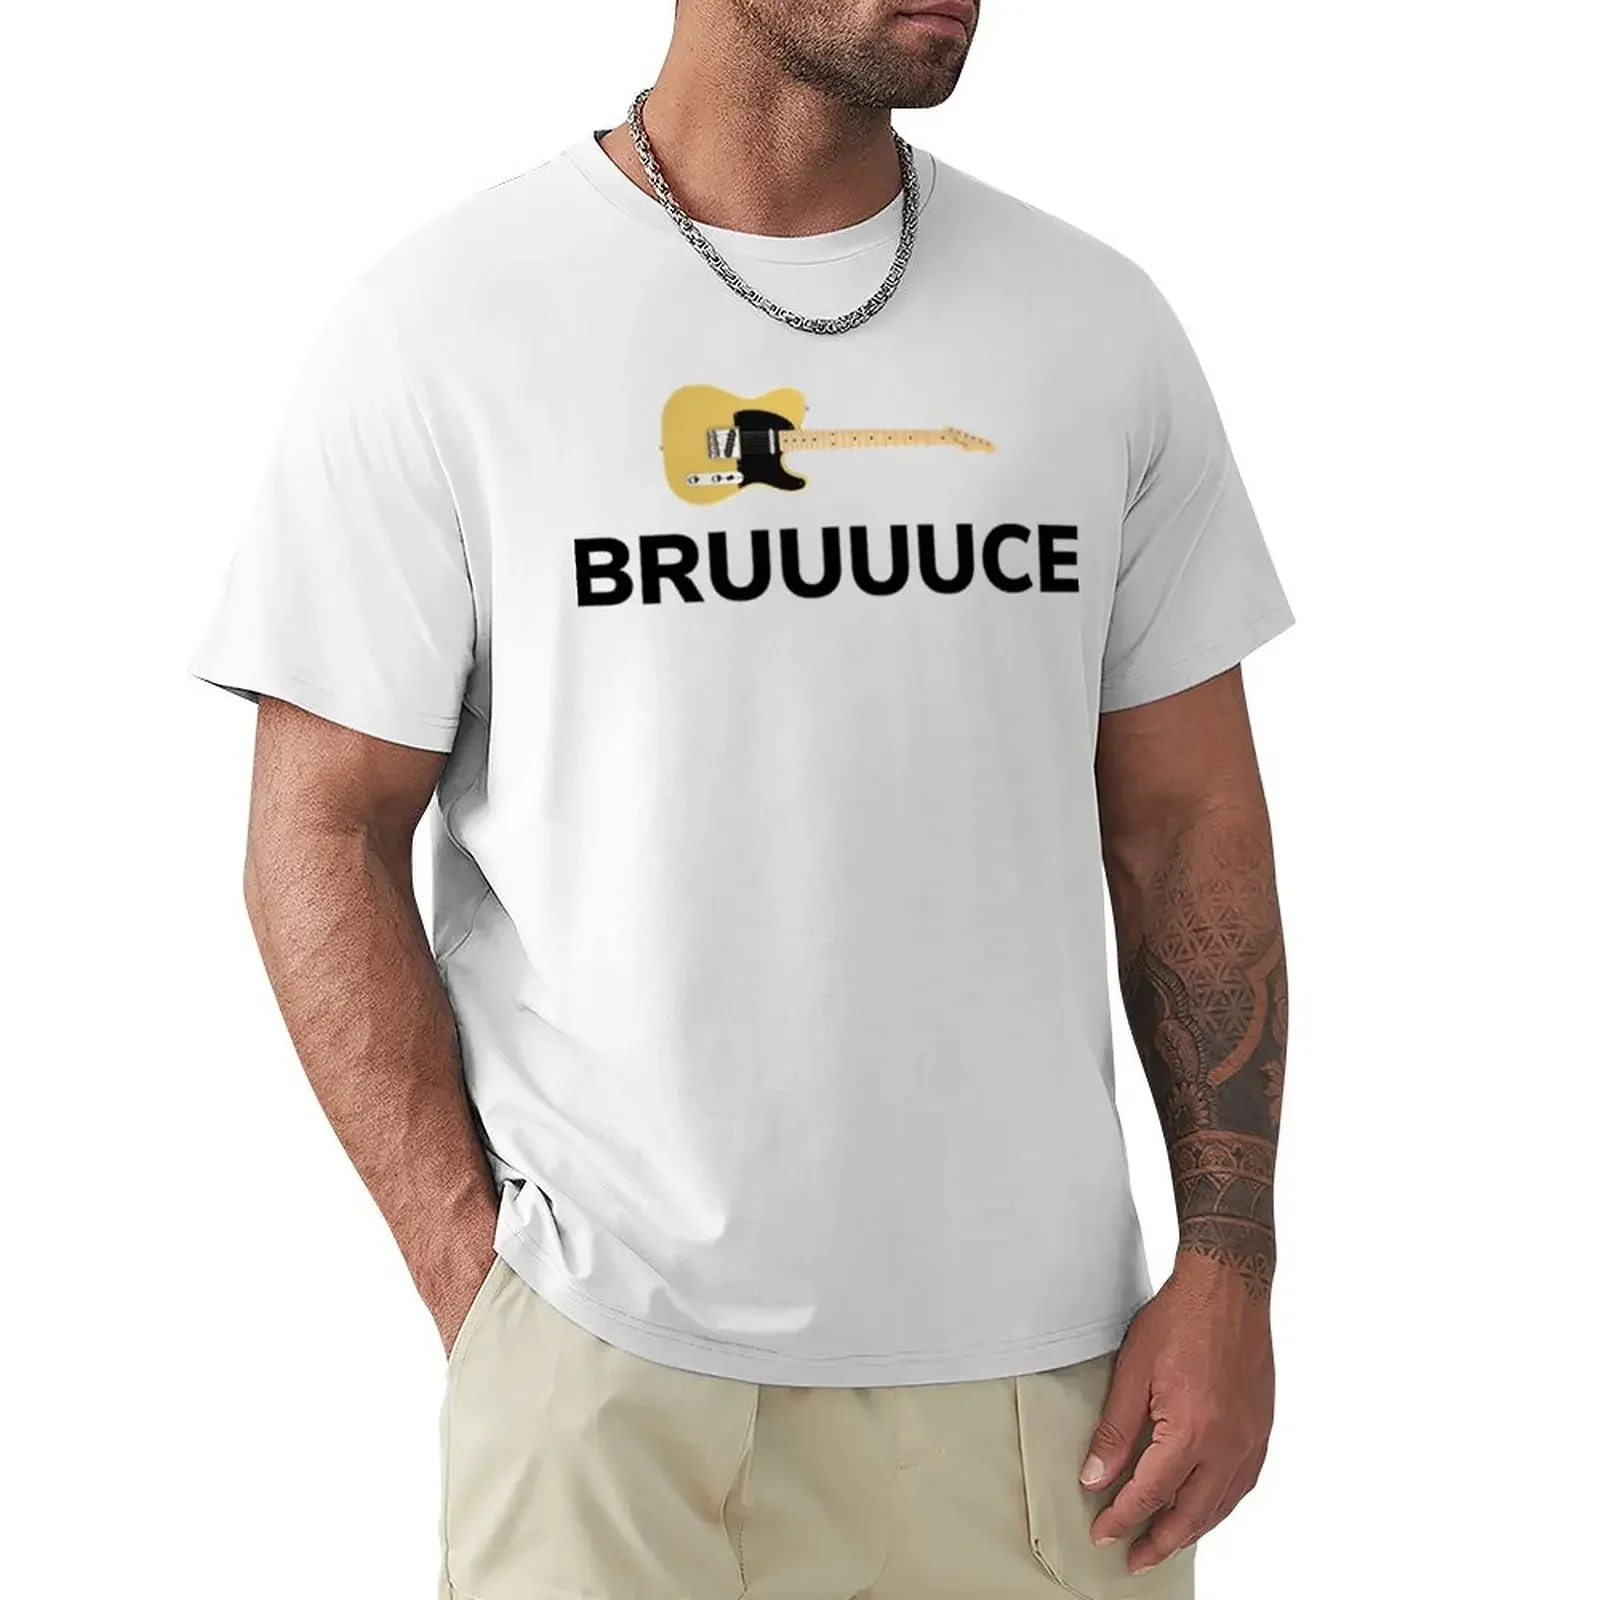 BRUUUUCE Classic T-shirt summer clothes hippie clothes funnys heavyweight t shirts for men